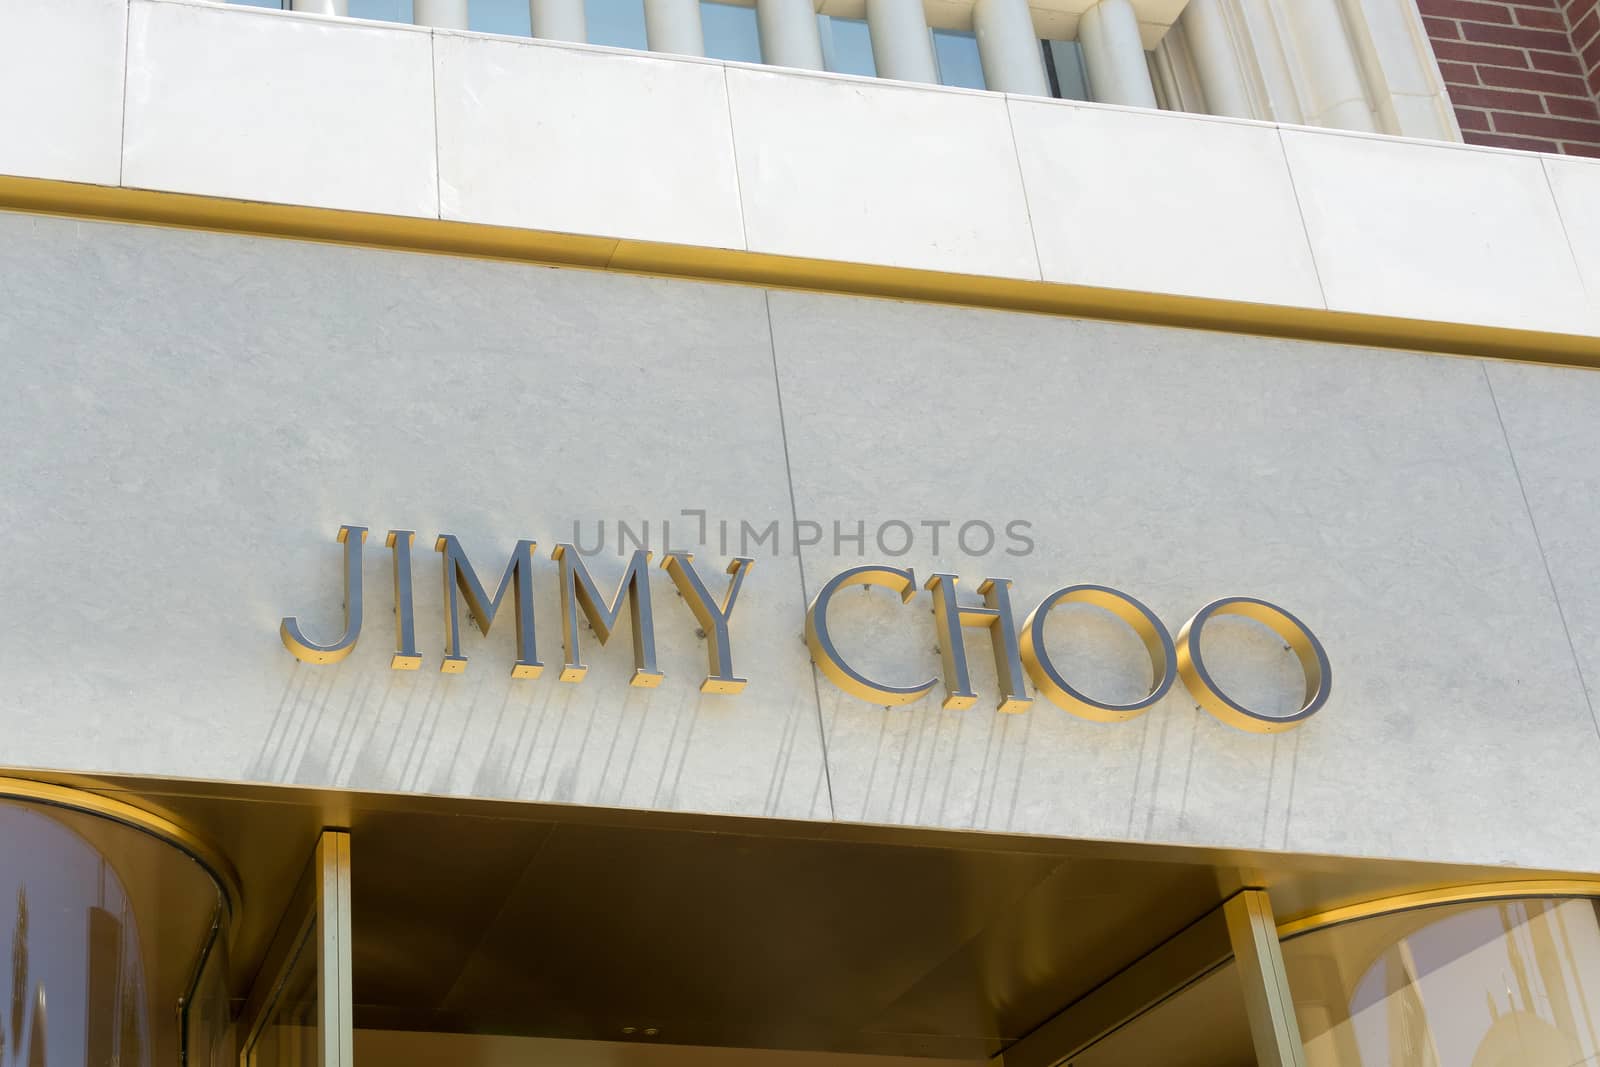 BEVERLY HILLS, CA/USA - MAY 10, 2015: Jimmy Choo retail store exterior. Jimmy Choo sells hand made women's shoes.